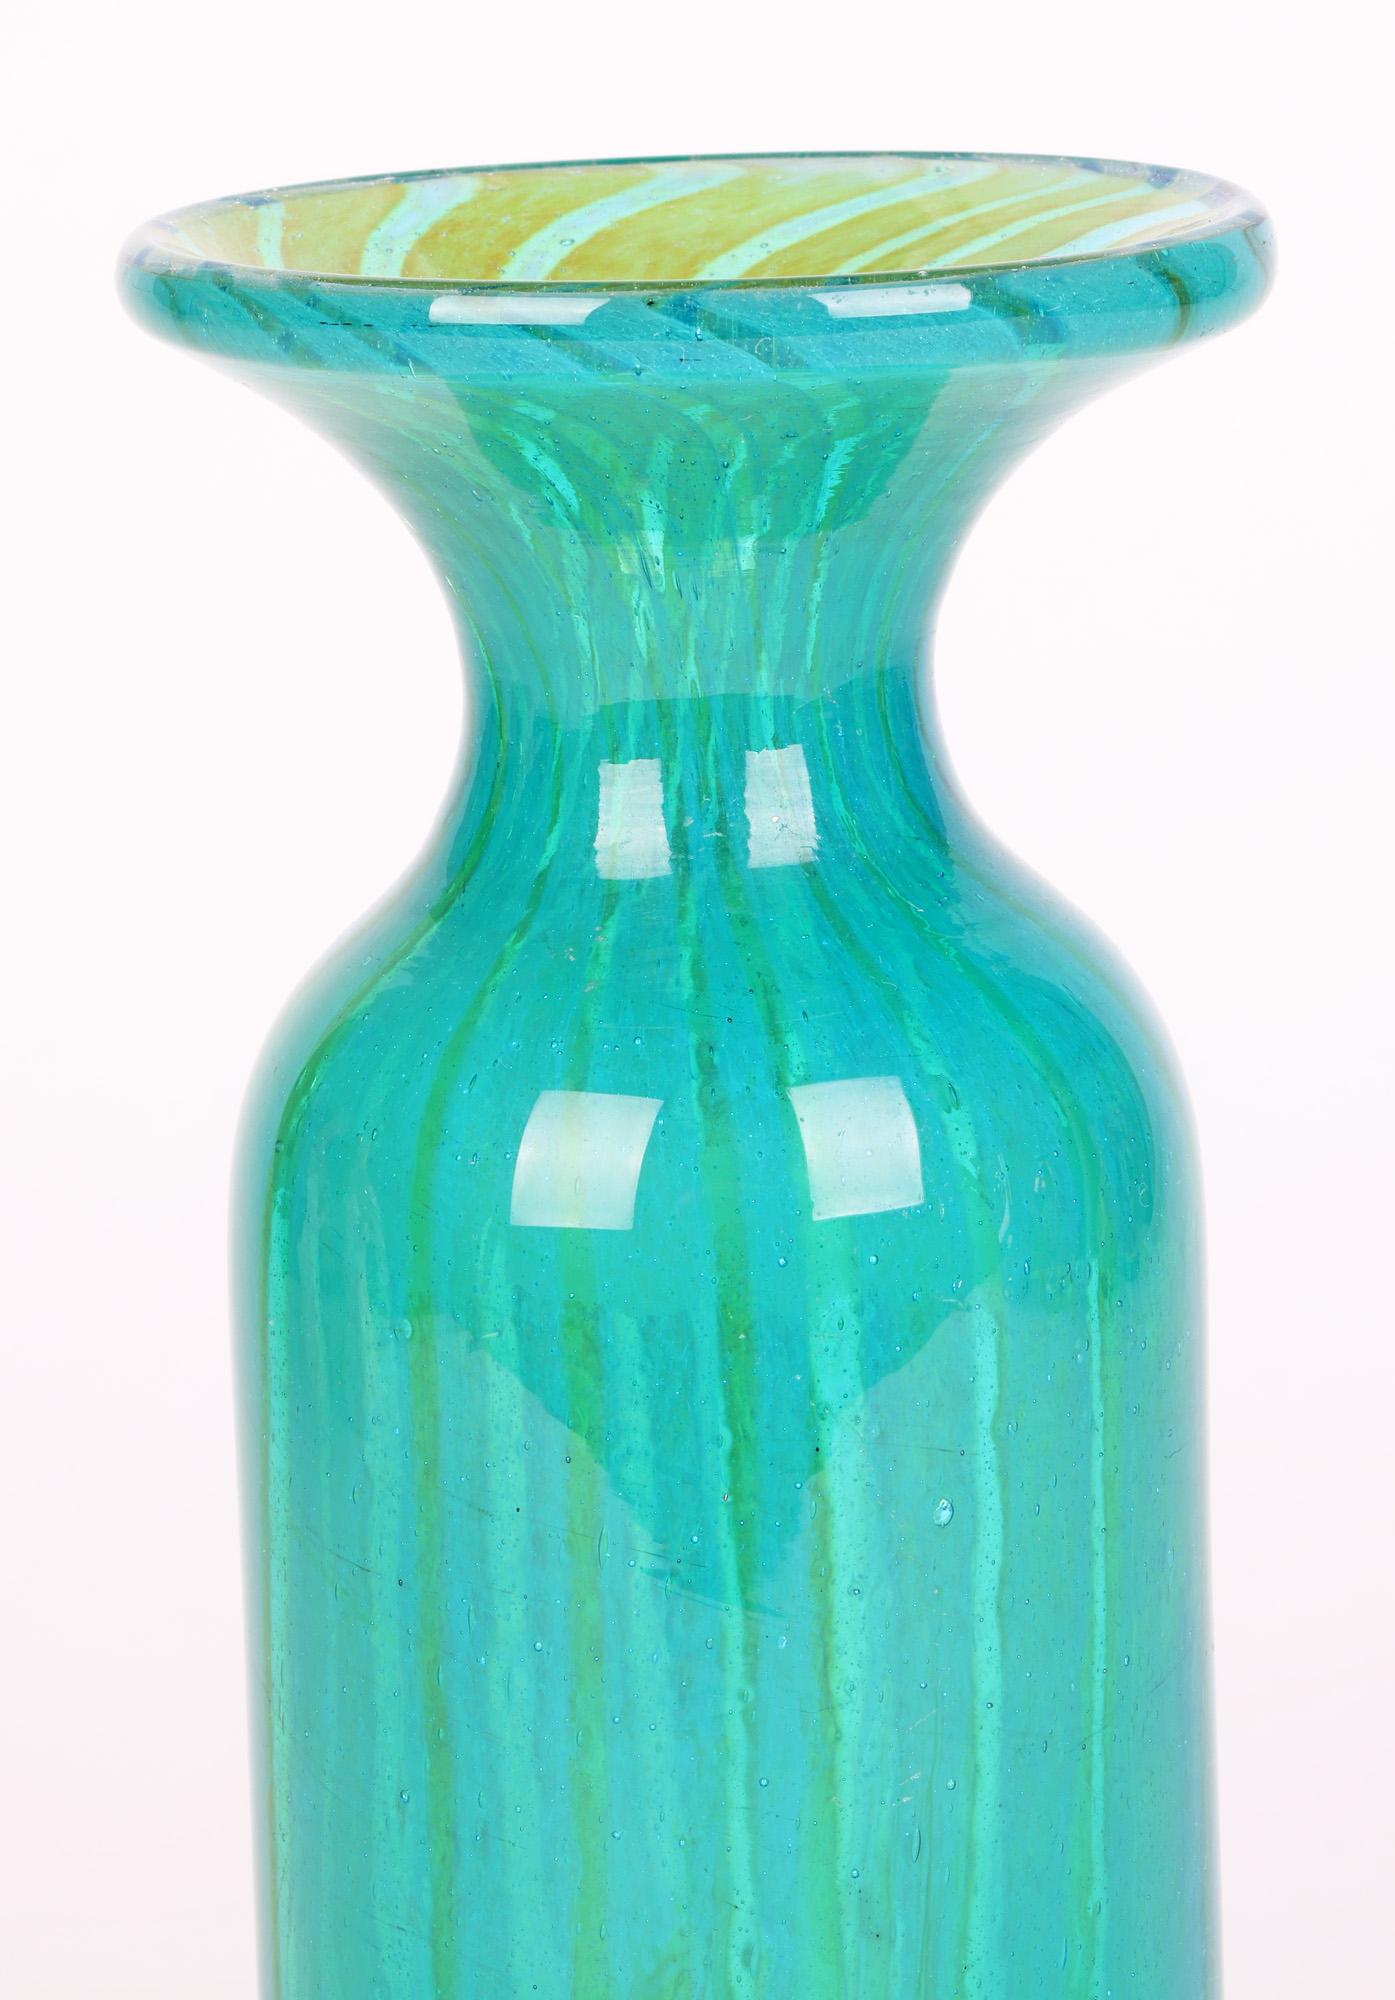 A tall and stylish Maltese art glass vase with sand colored streaks running through a blue body made by Medina and designed by Michael Harris in the early 1970’s. The hand blown glass vase is of tall cylindrical shape with a pinched neck and wide